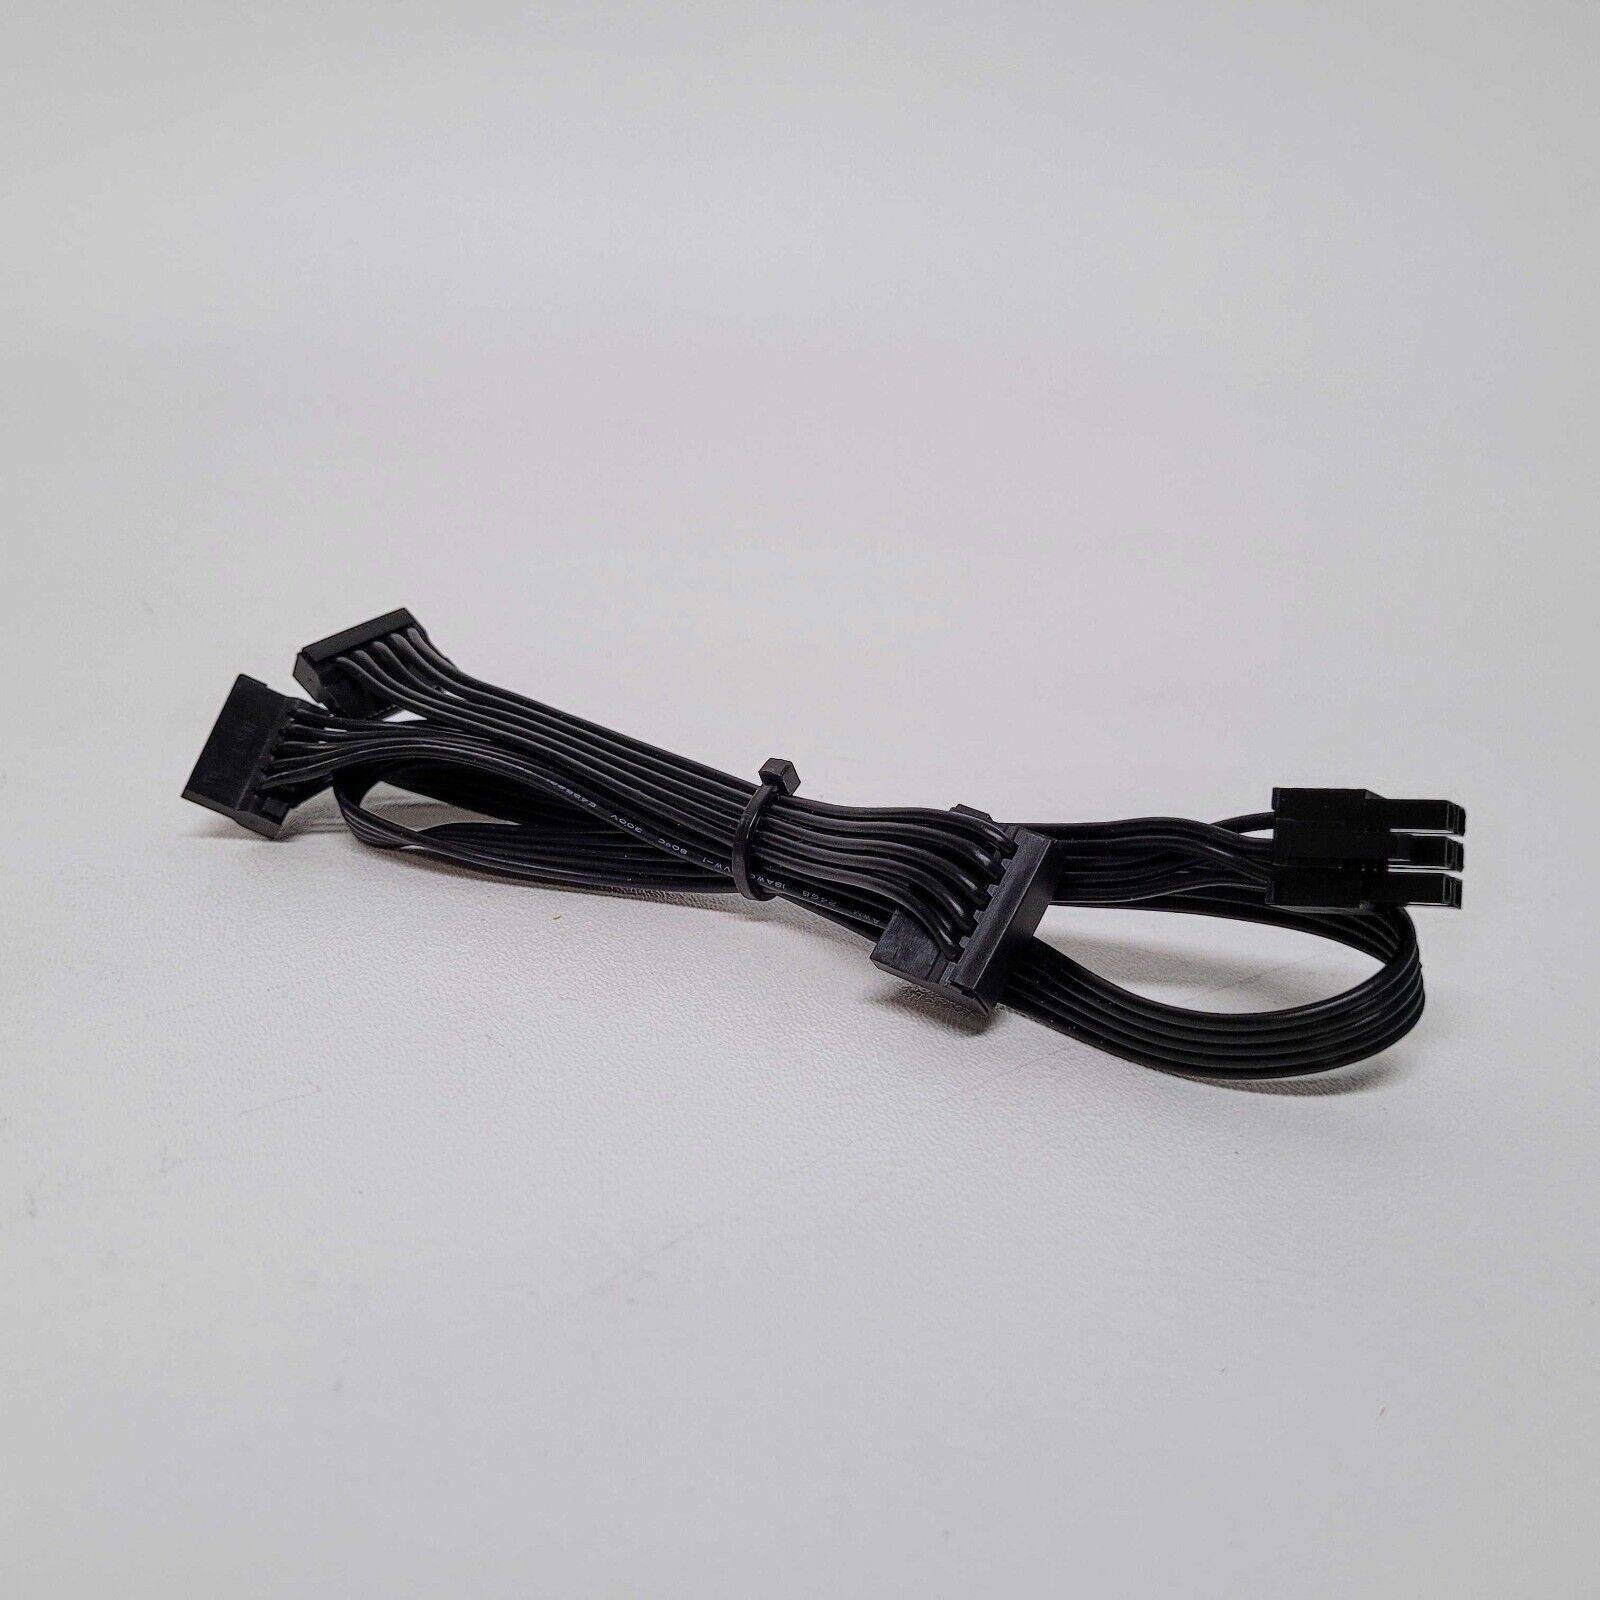 *NEW* EVGA 6-pin to 3x SATA Power Cable - W001-00-000125